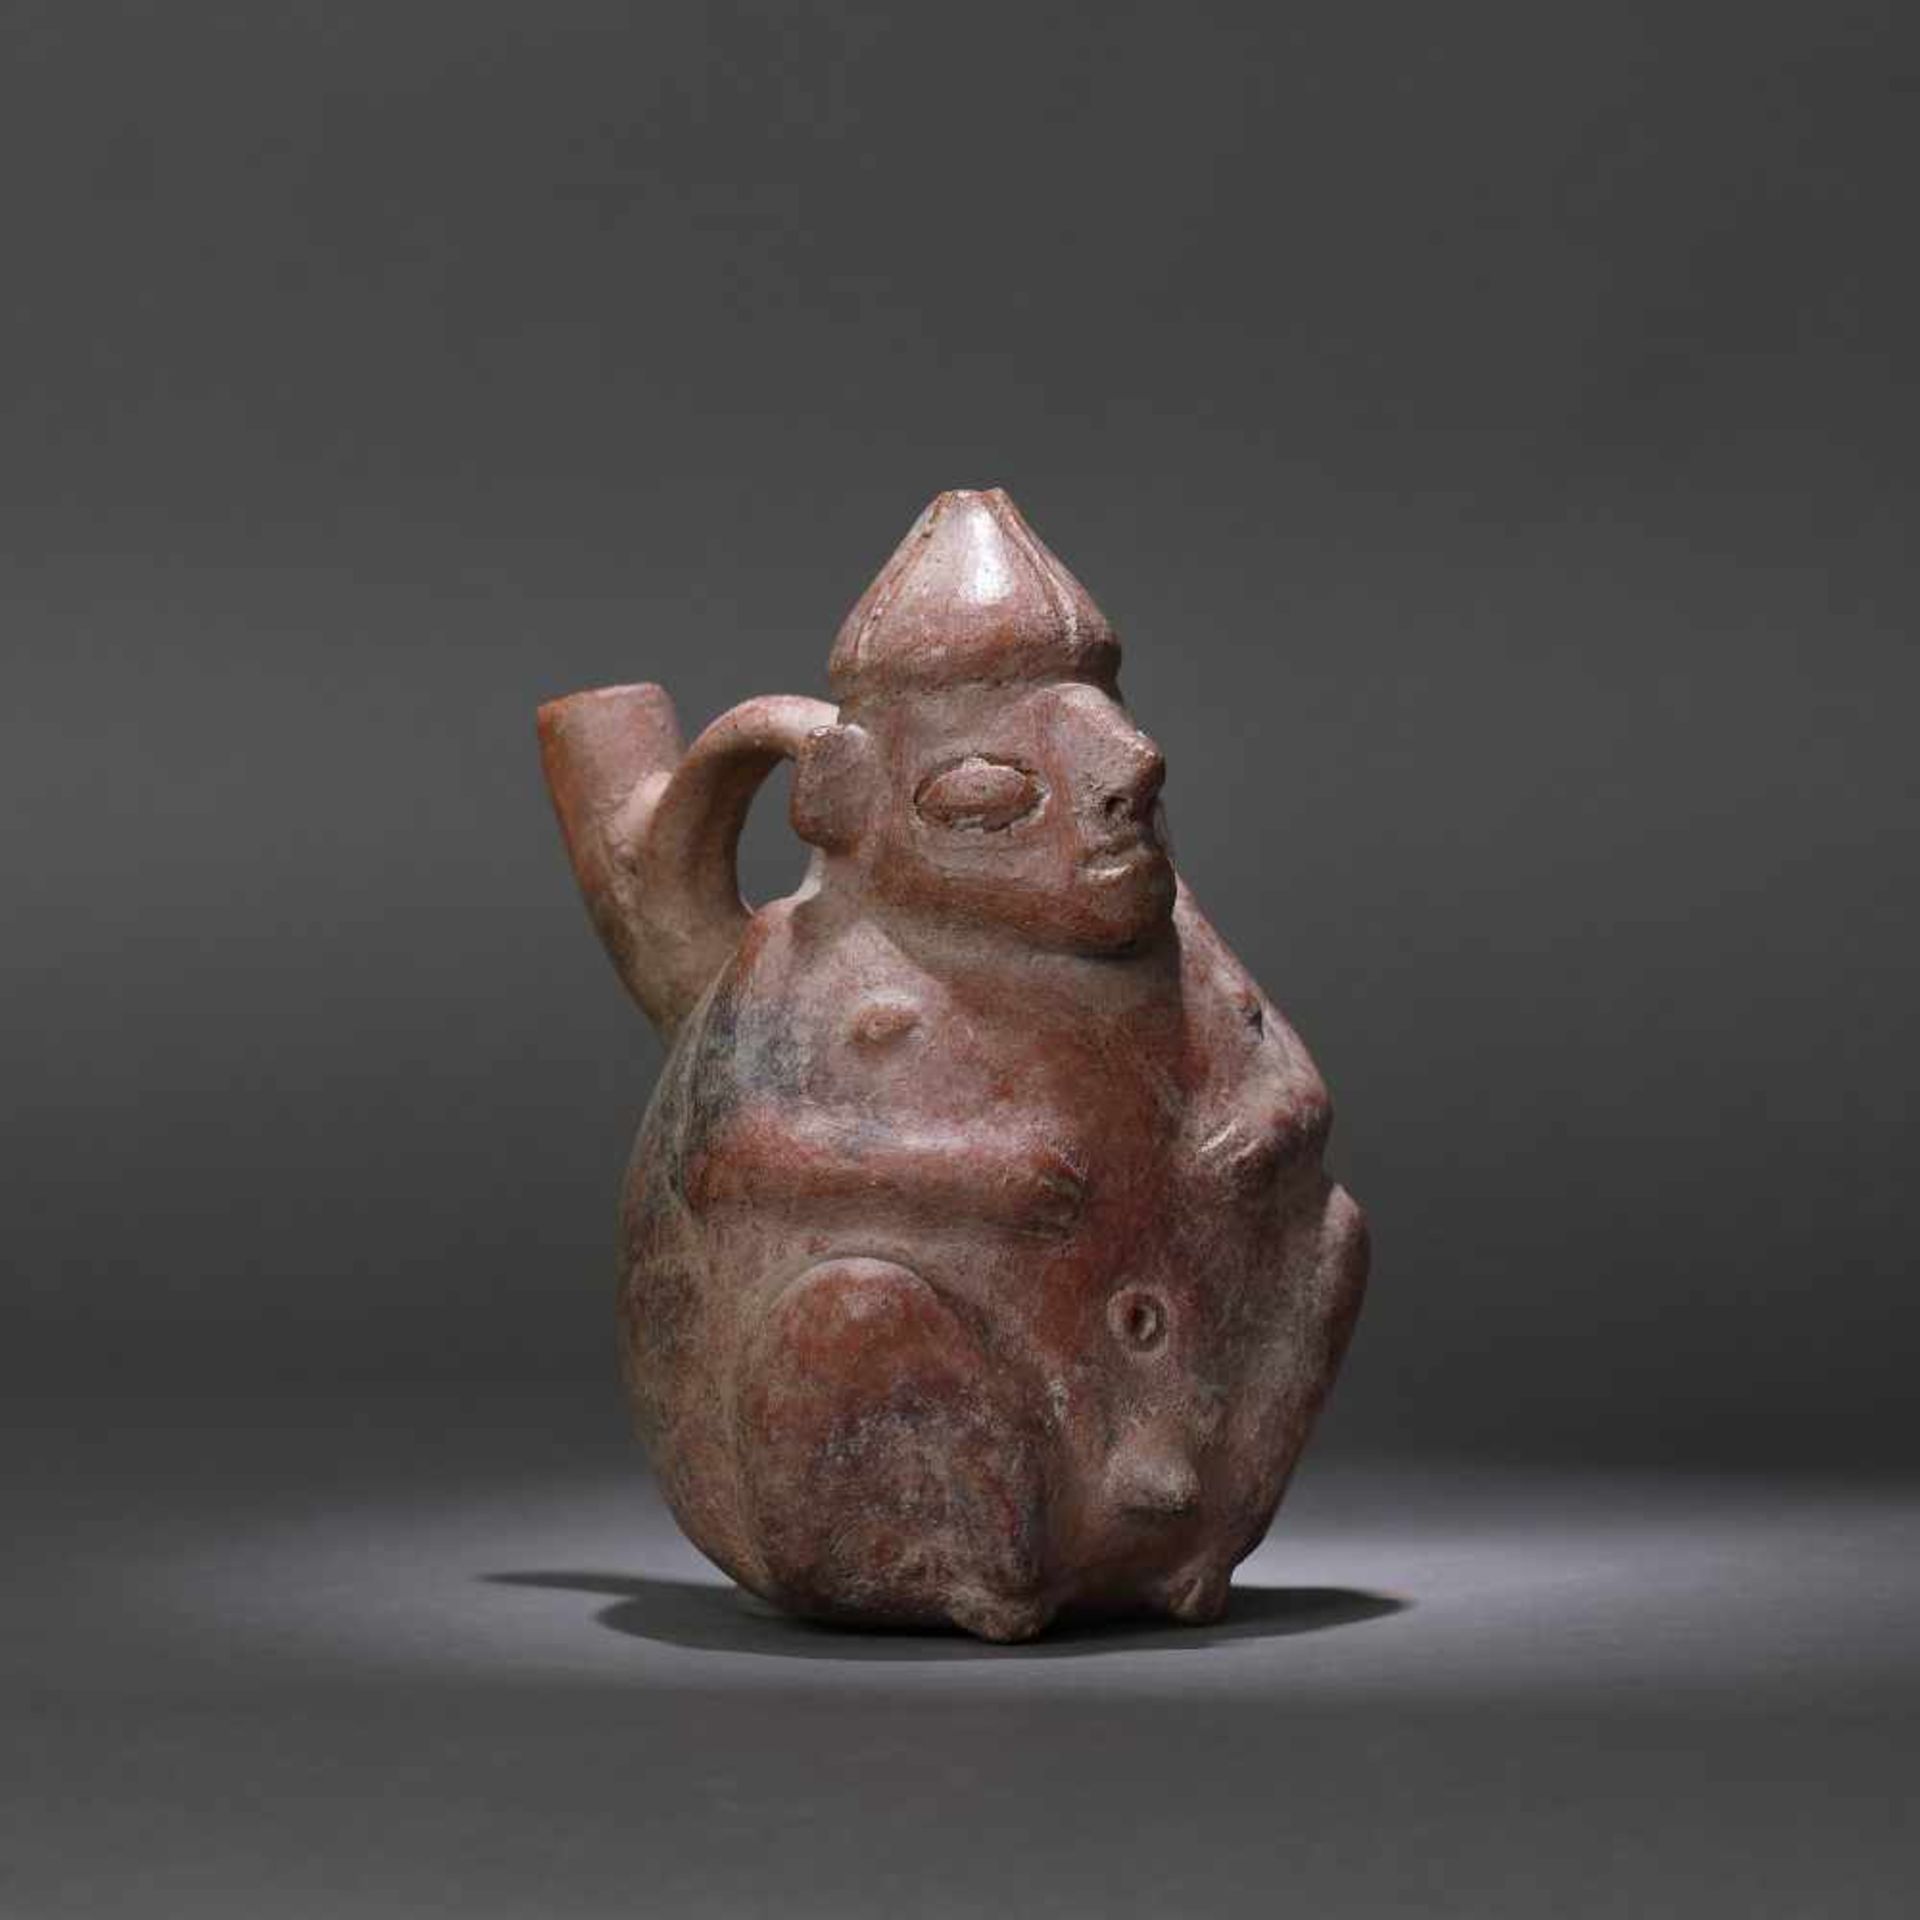 Ceramic vessel, illustrating a man, Vicus culture, Peru, approx. 1,550 years old, 5th century (accom - Image 3 of 6